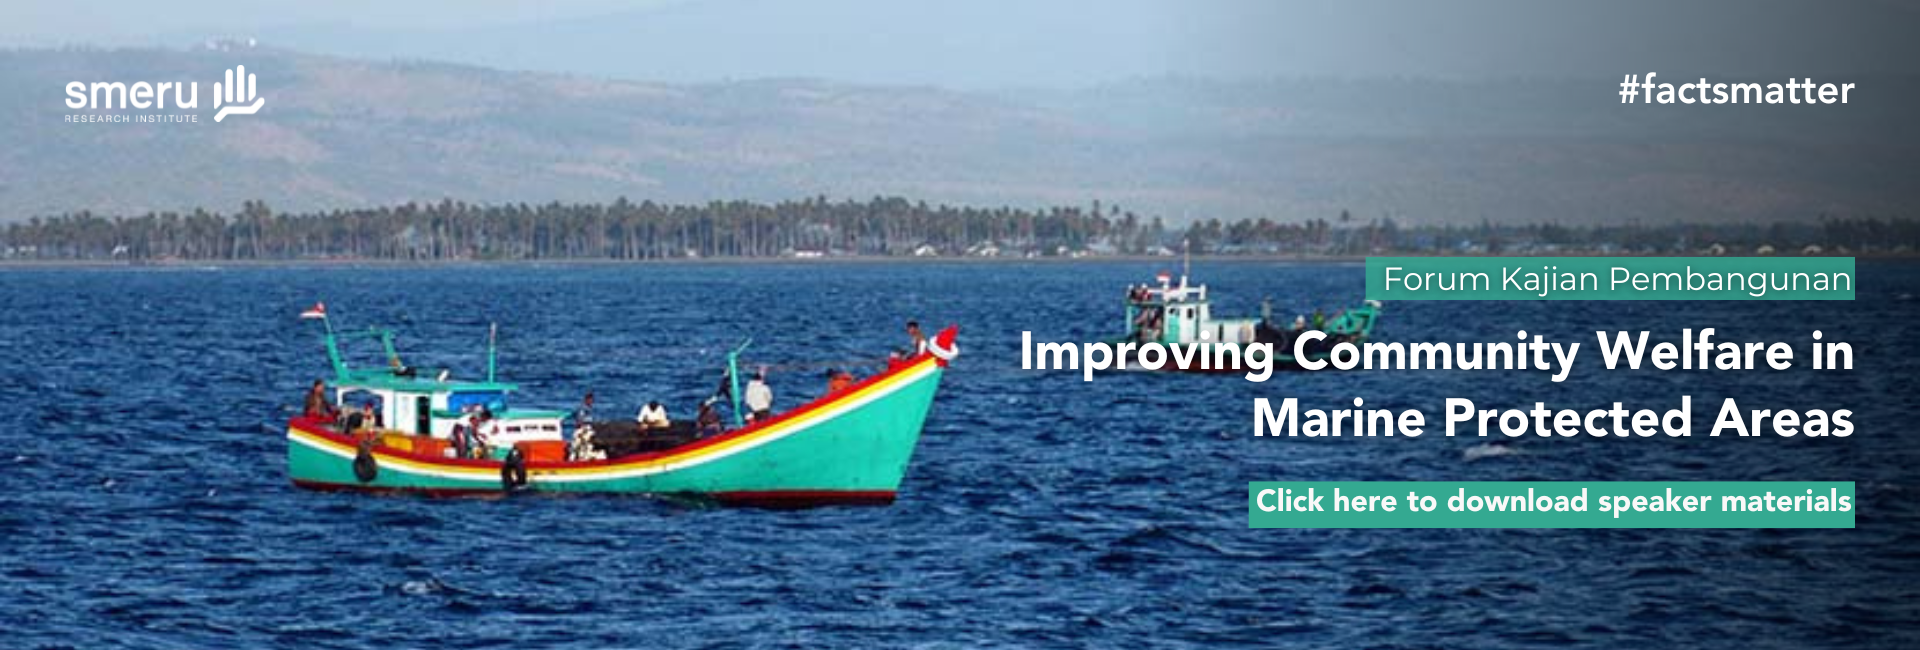 Improving Community Welfare in Marine Protected Areas